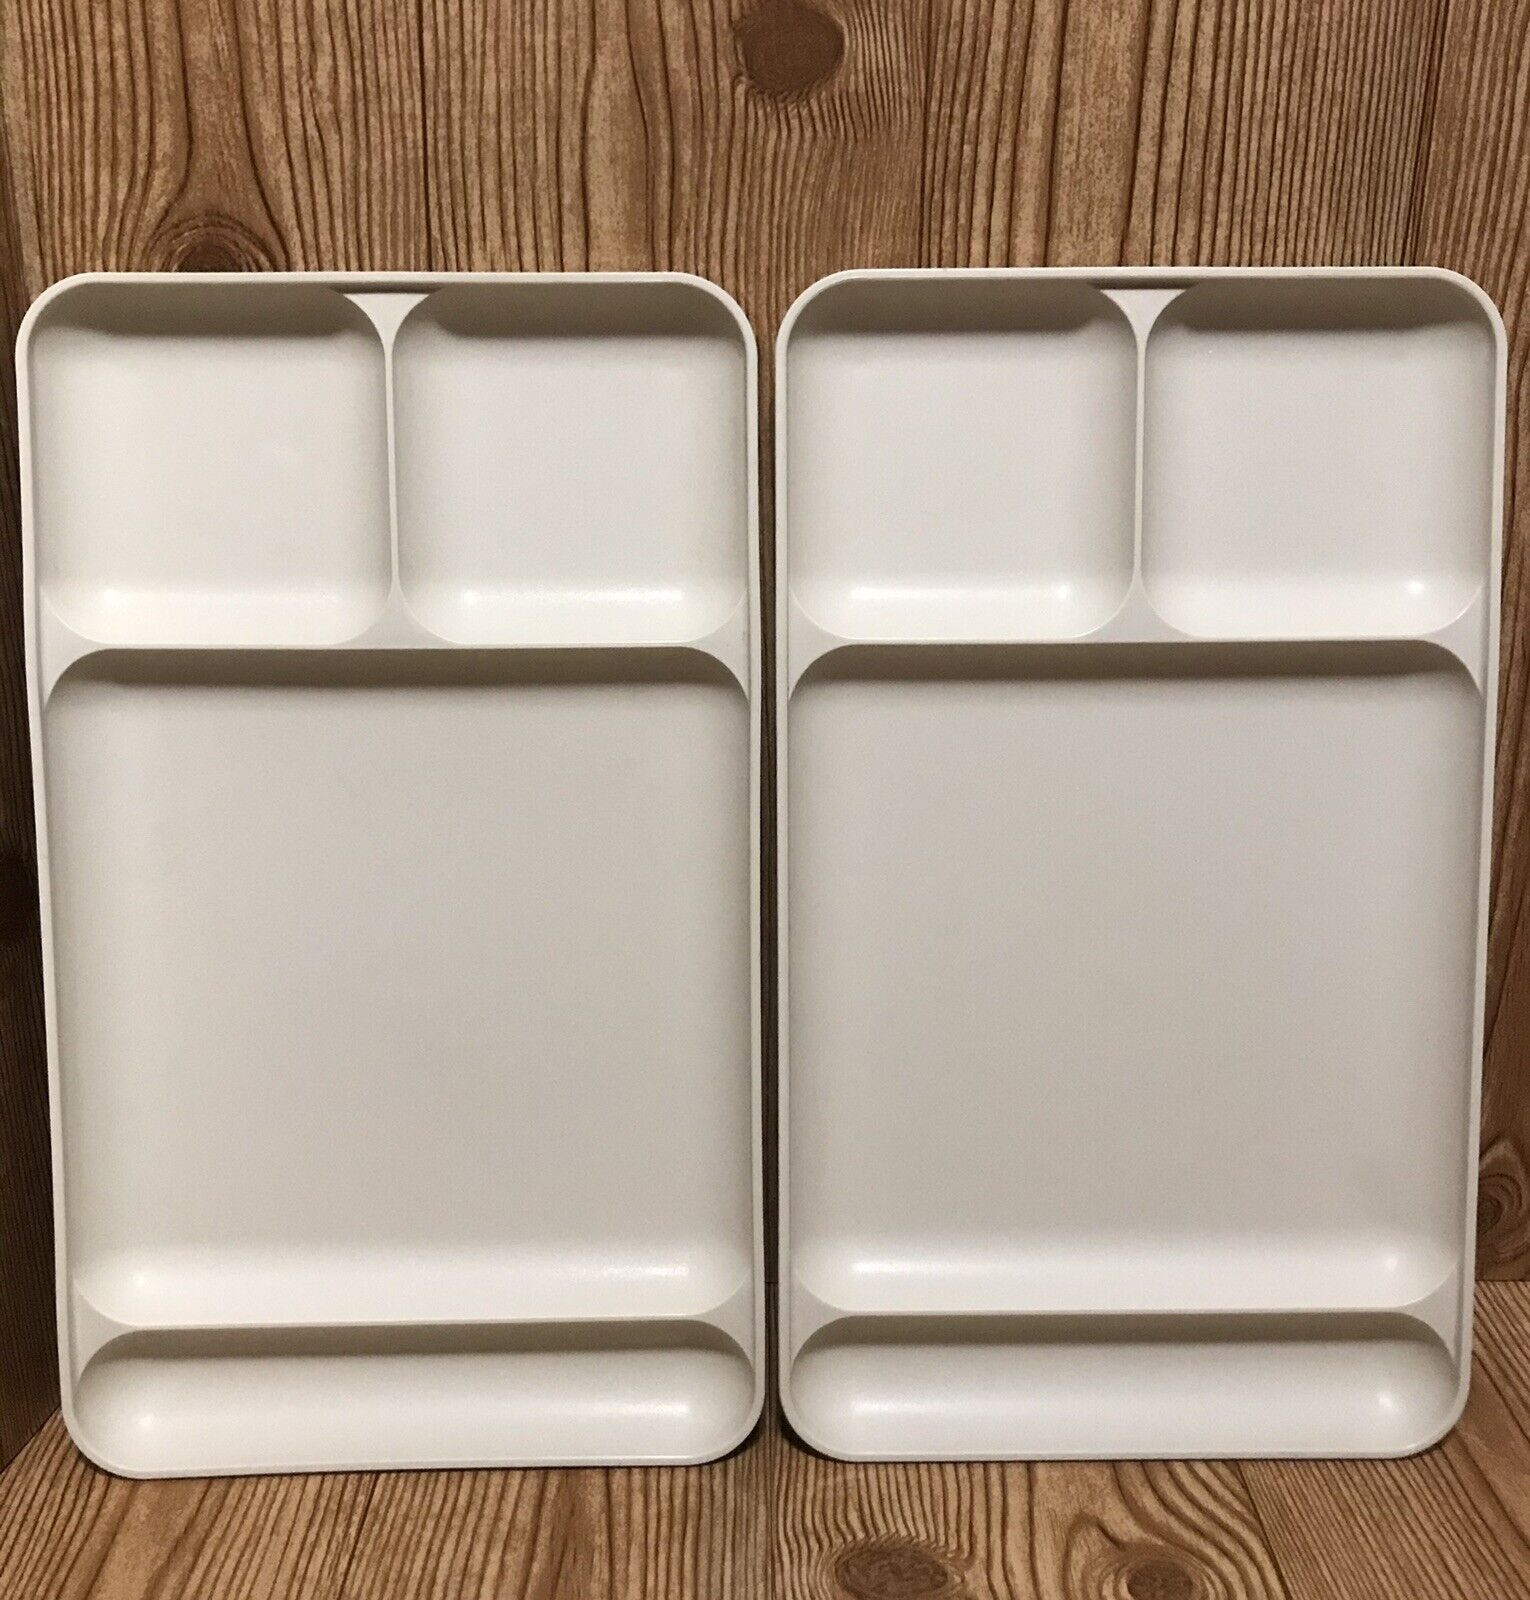 2 Vintage Tupperware Ivory Cream Beige Meal Trays 1535 Picnic Cafeteria Plate Tupperware